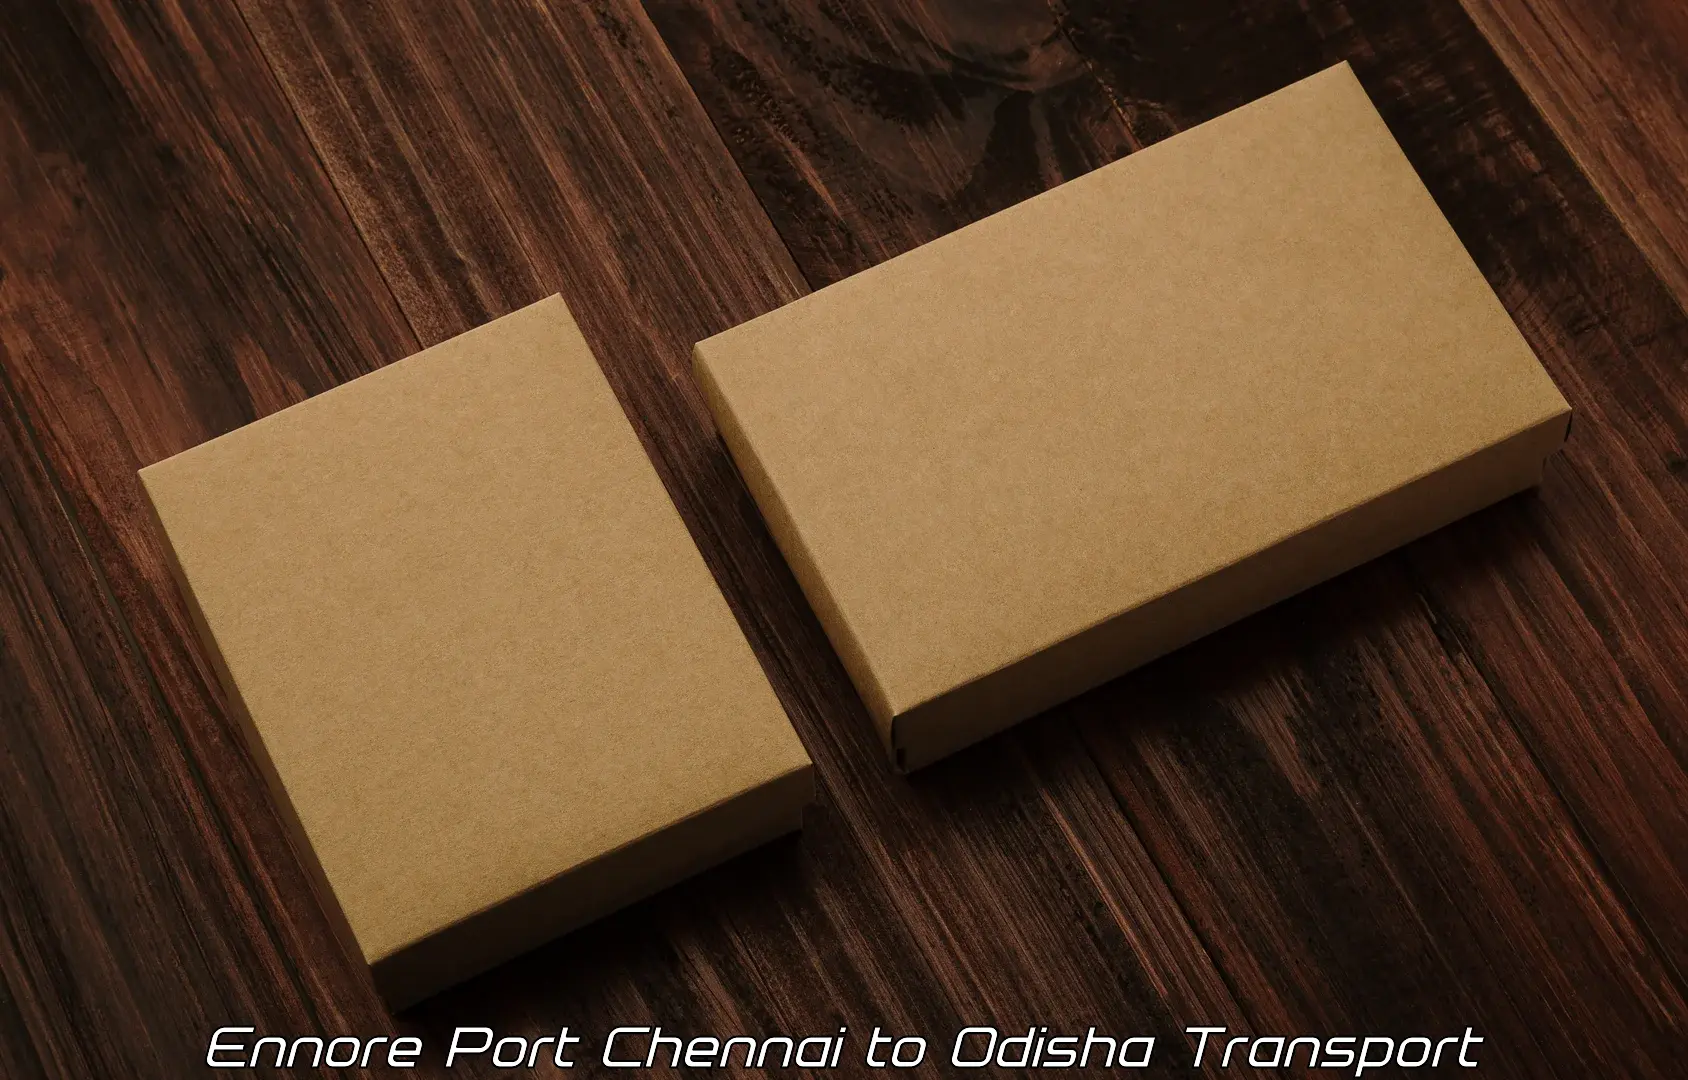 Road transport online services Ennore Port Chennai to Sohela